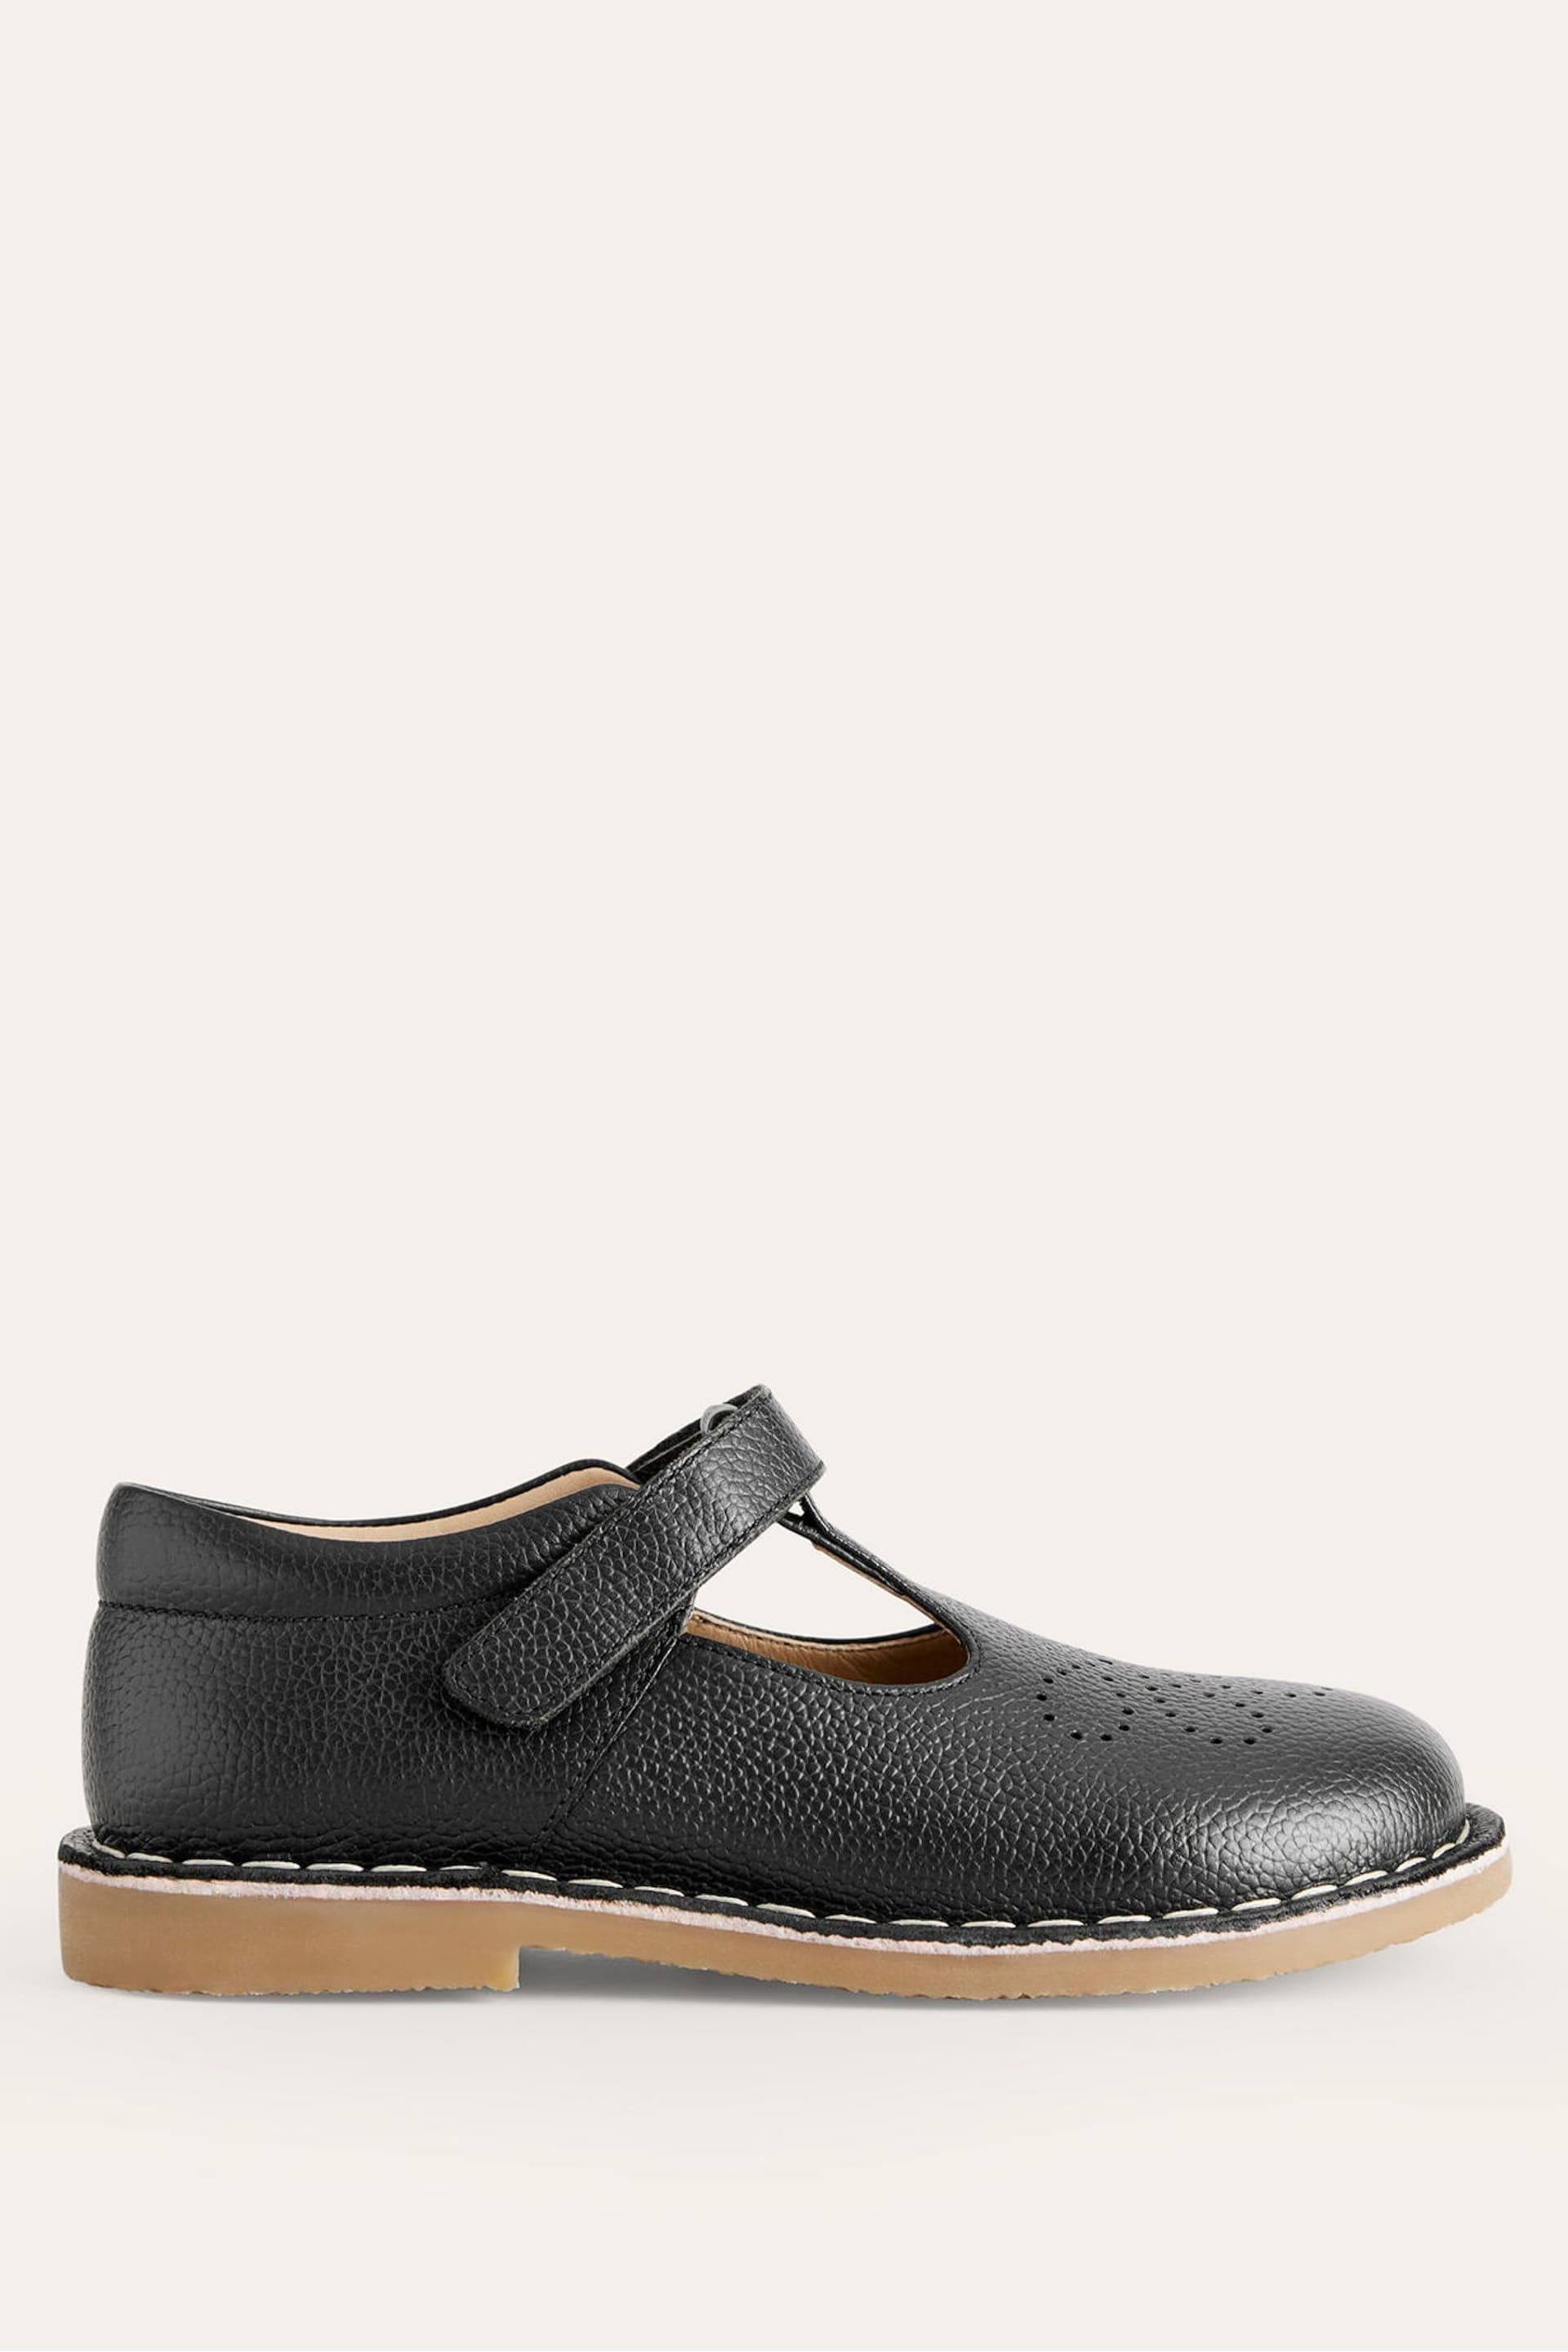 Boden Black Leather T-Bar School Shoes - Image 2 of 3